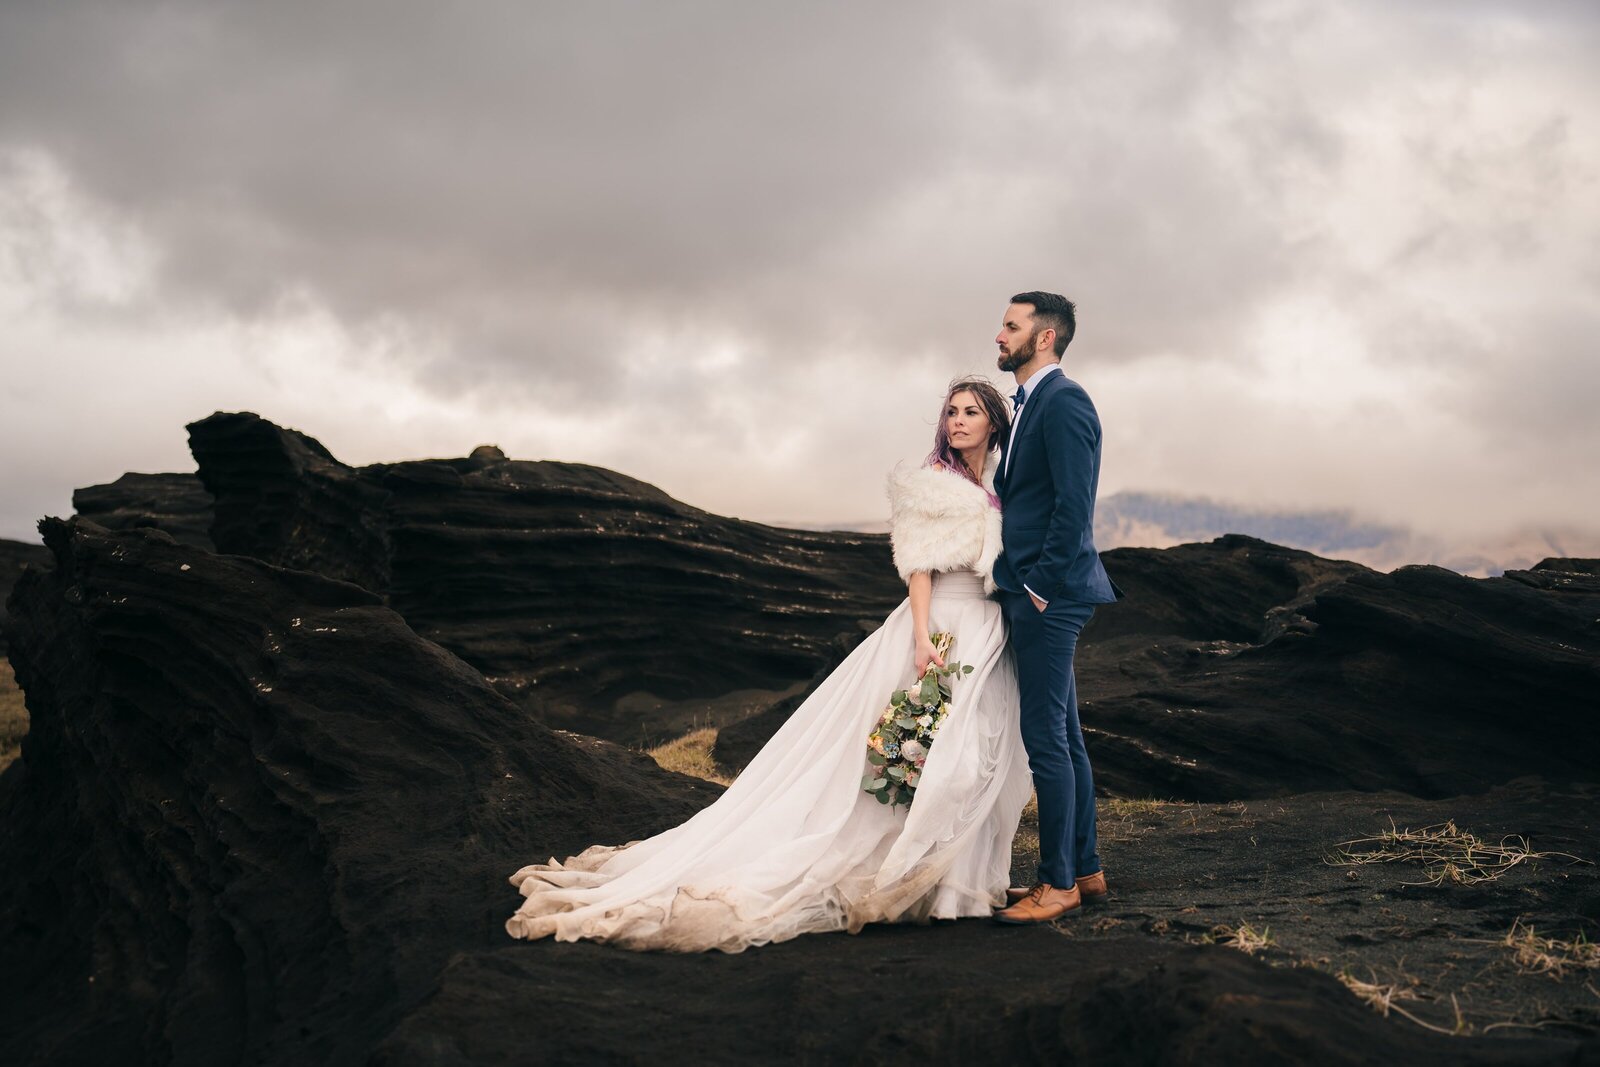 Couple staring into the distance during their Elopement in Iceland.